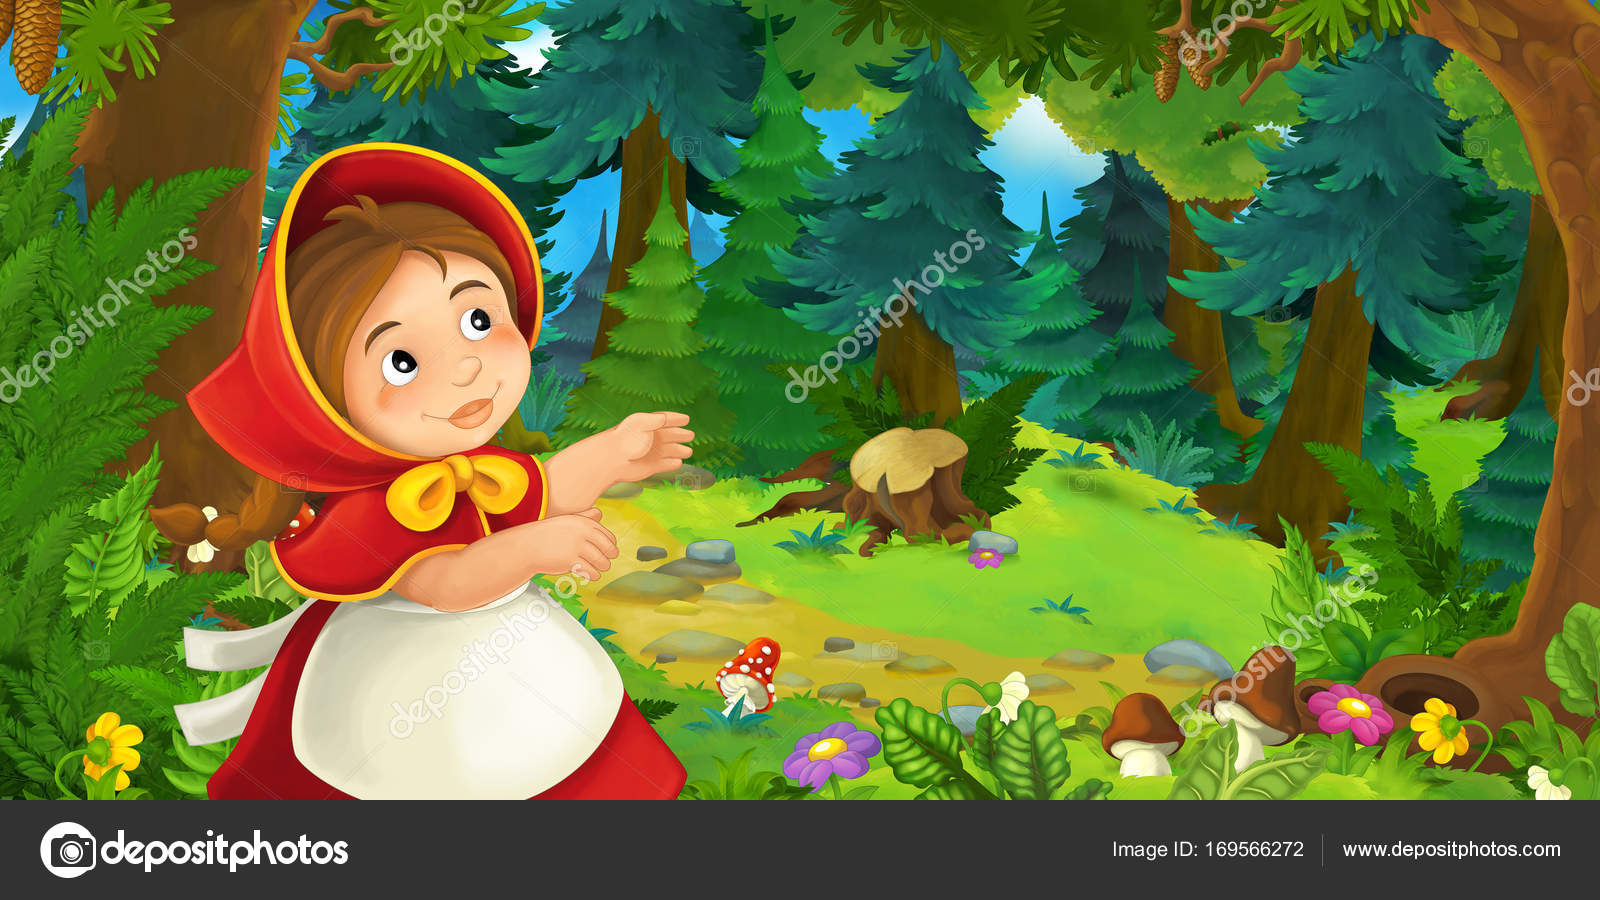 Cartoon Scene Little Red Riding Hood Walking Forest Colorful Illustration  Stock Photo by ©agaes8080 169566272